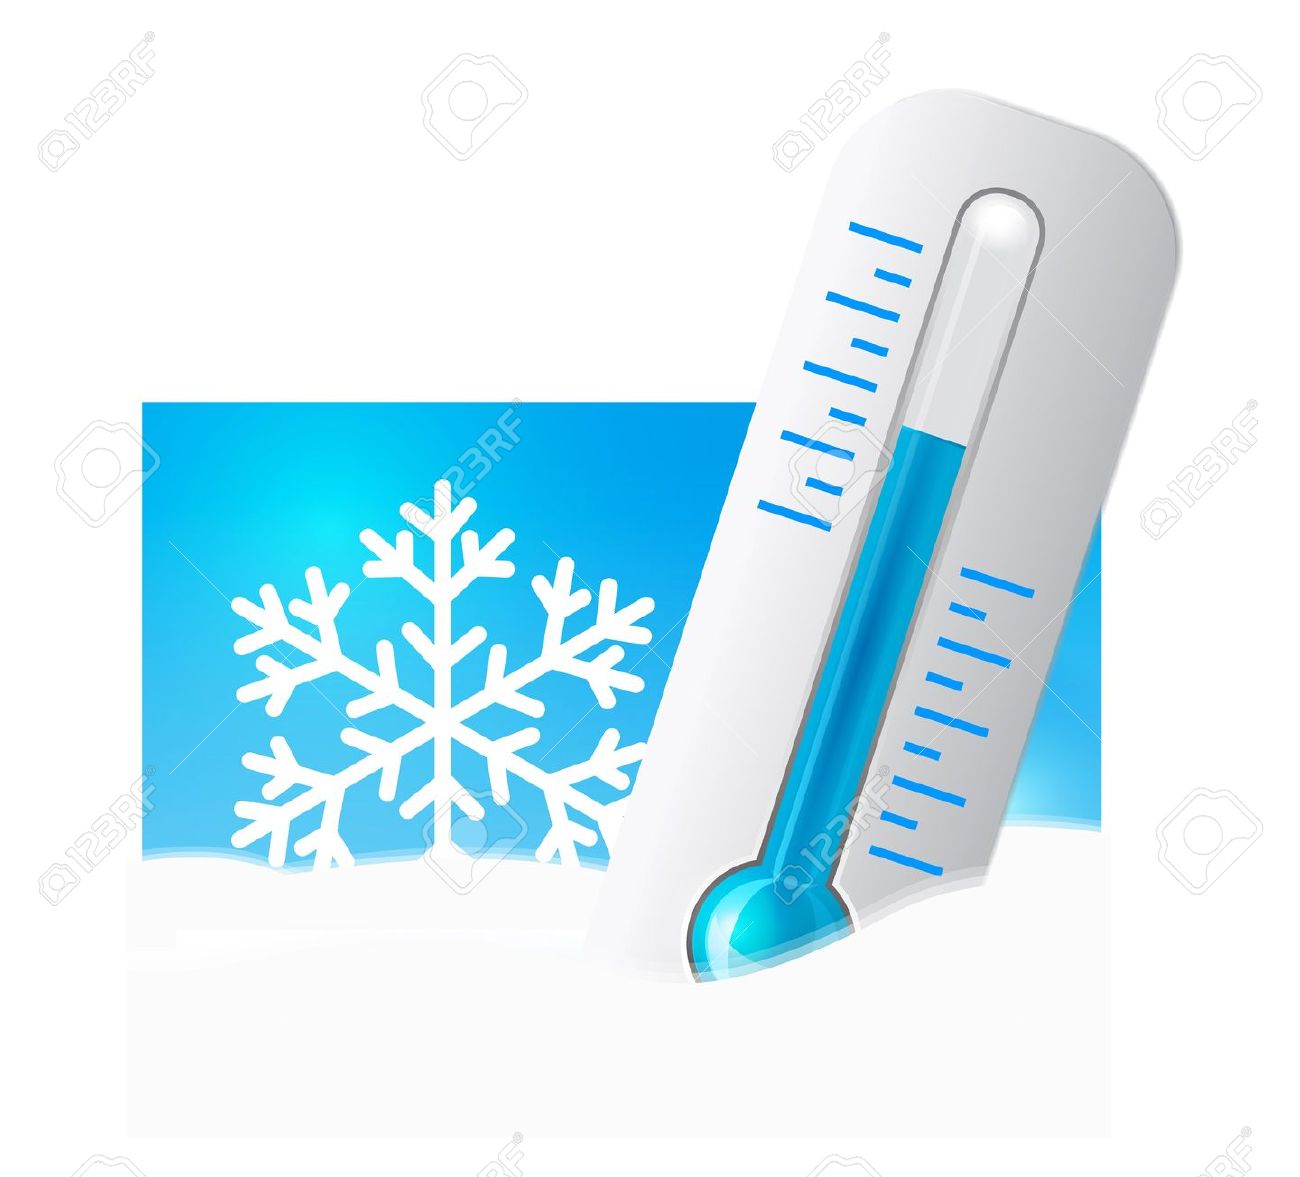 freezing cold thermometer